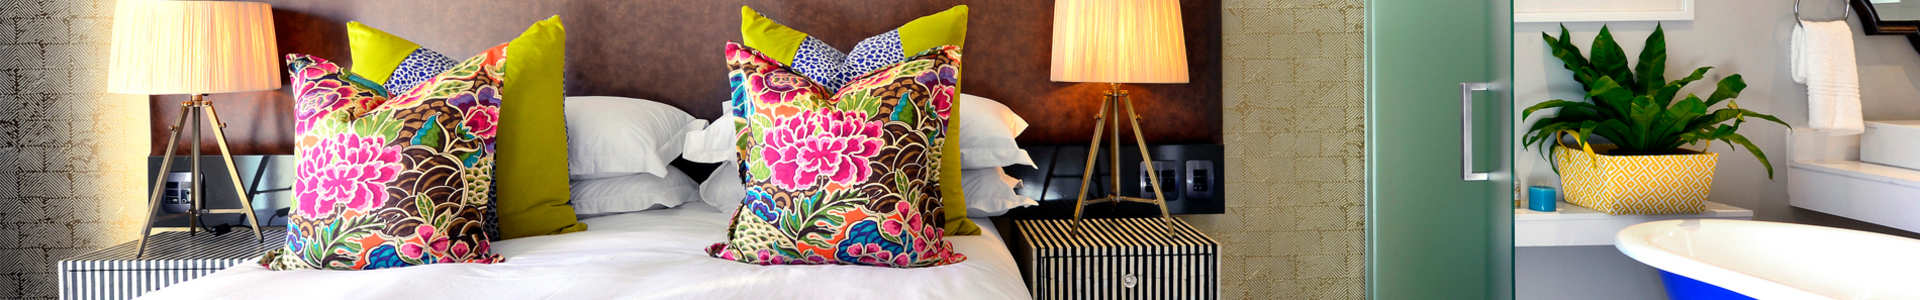 Franschhoek Boutique Hotel Western Cape South Africa Accommodation